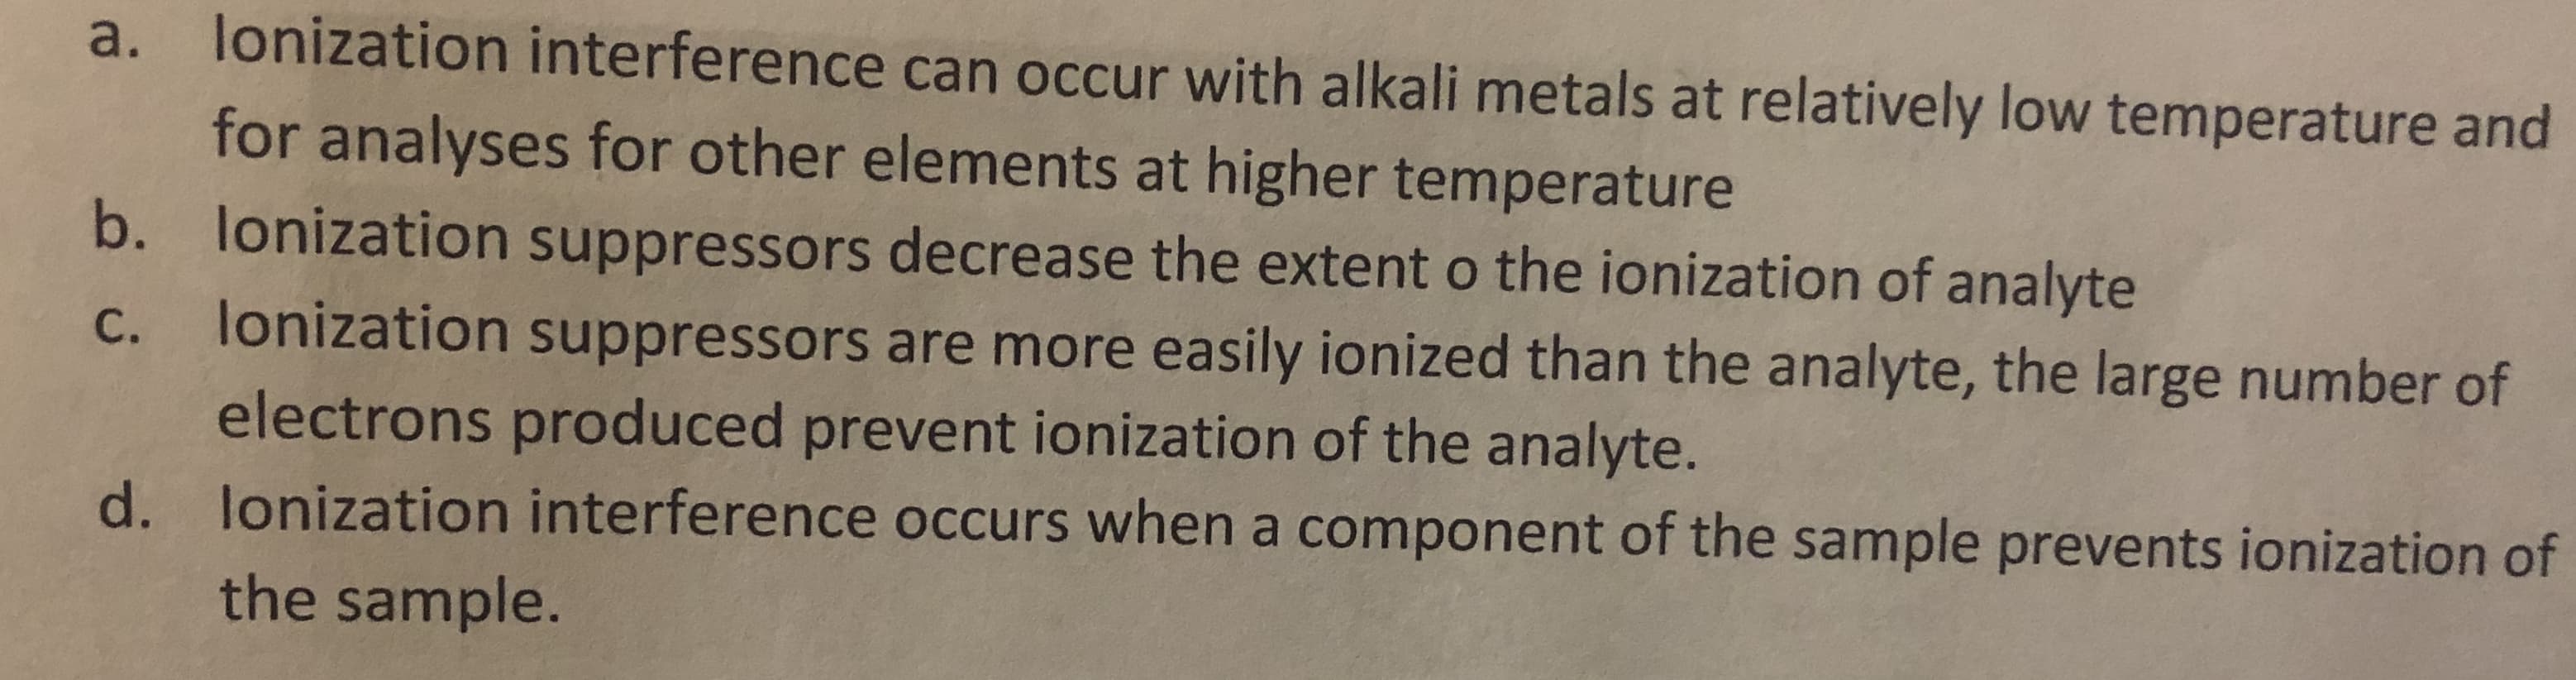 lonization interference can occur with alkali metals at relatively low temperature and
a.
for analyses for other elements at higher temperature
b.
lonization suppressors decrease the extent o the ionization of analyte
lonization suppressors are more easily ionized than the analyte, the large number of
electrons produced prevent ionization of the analyte.
С.
lonization interference occurs when a component of the sample prevents ionization of
d.
the sample.
